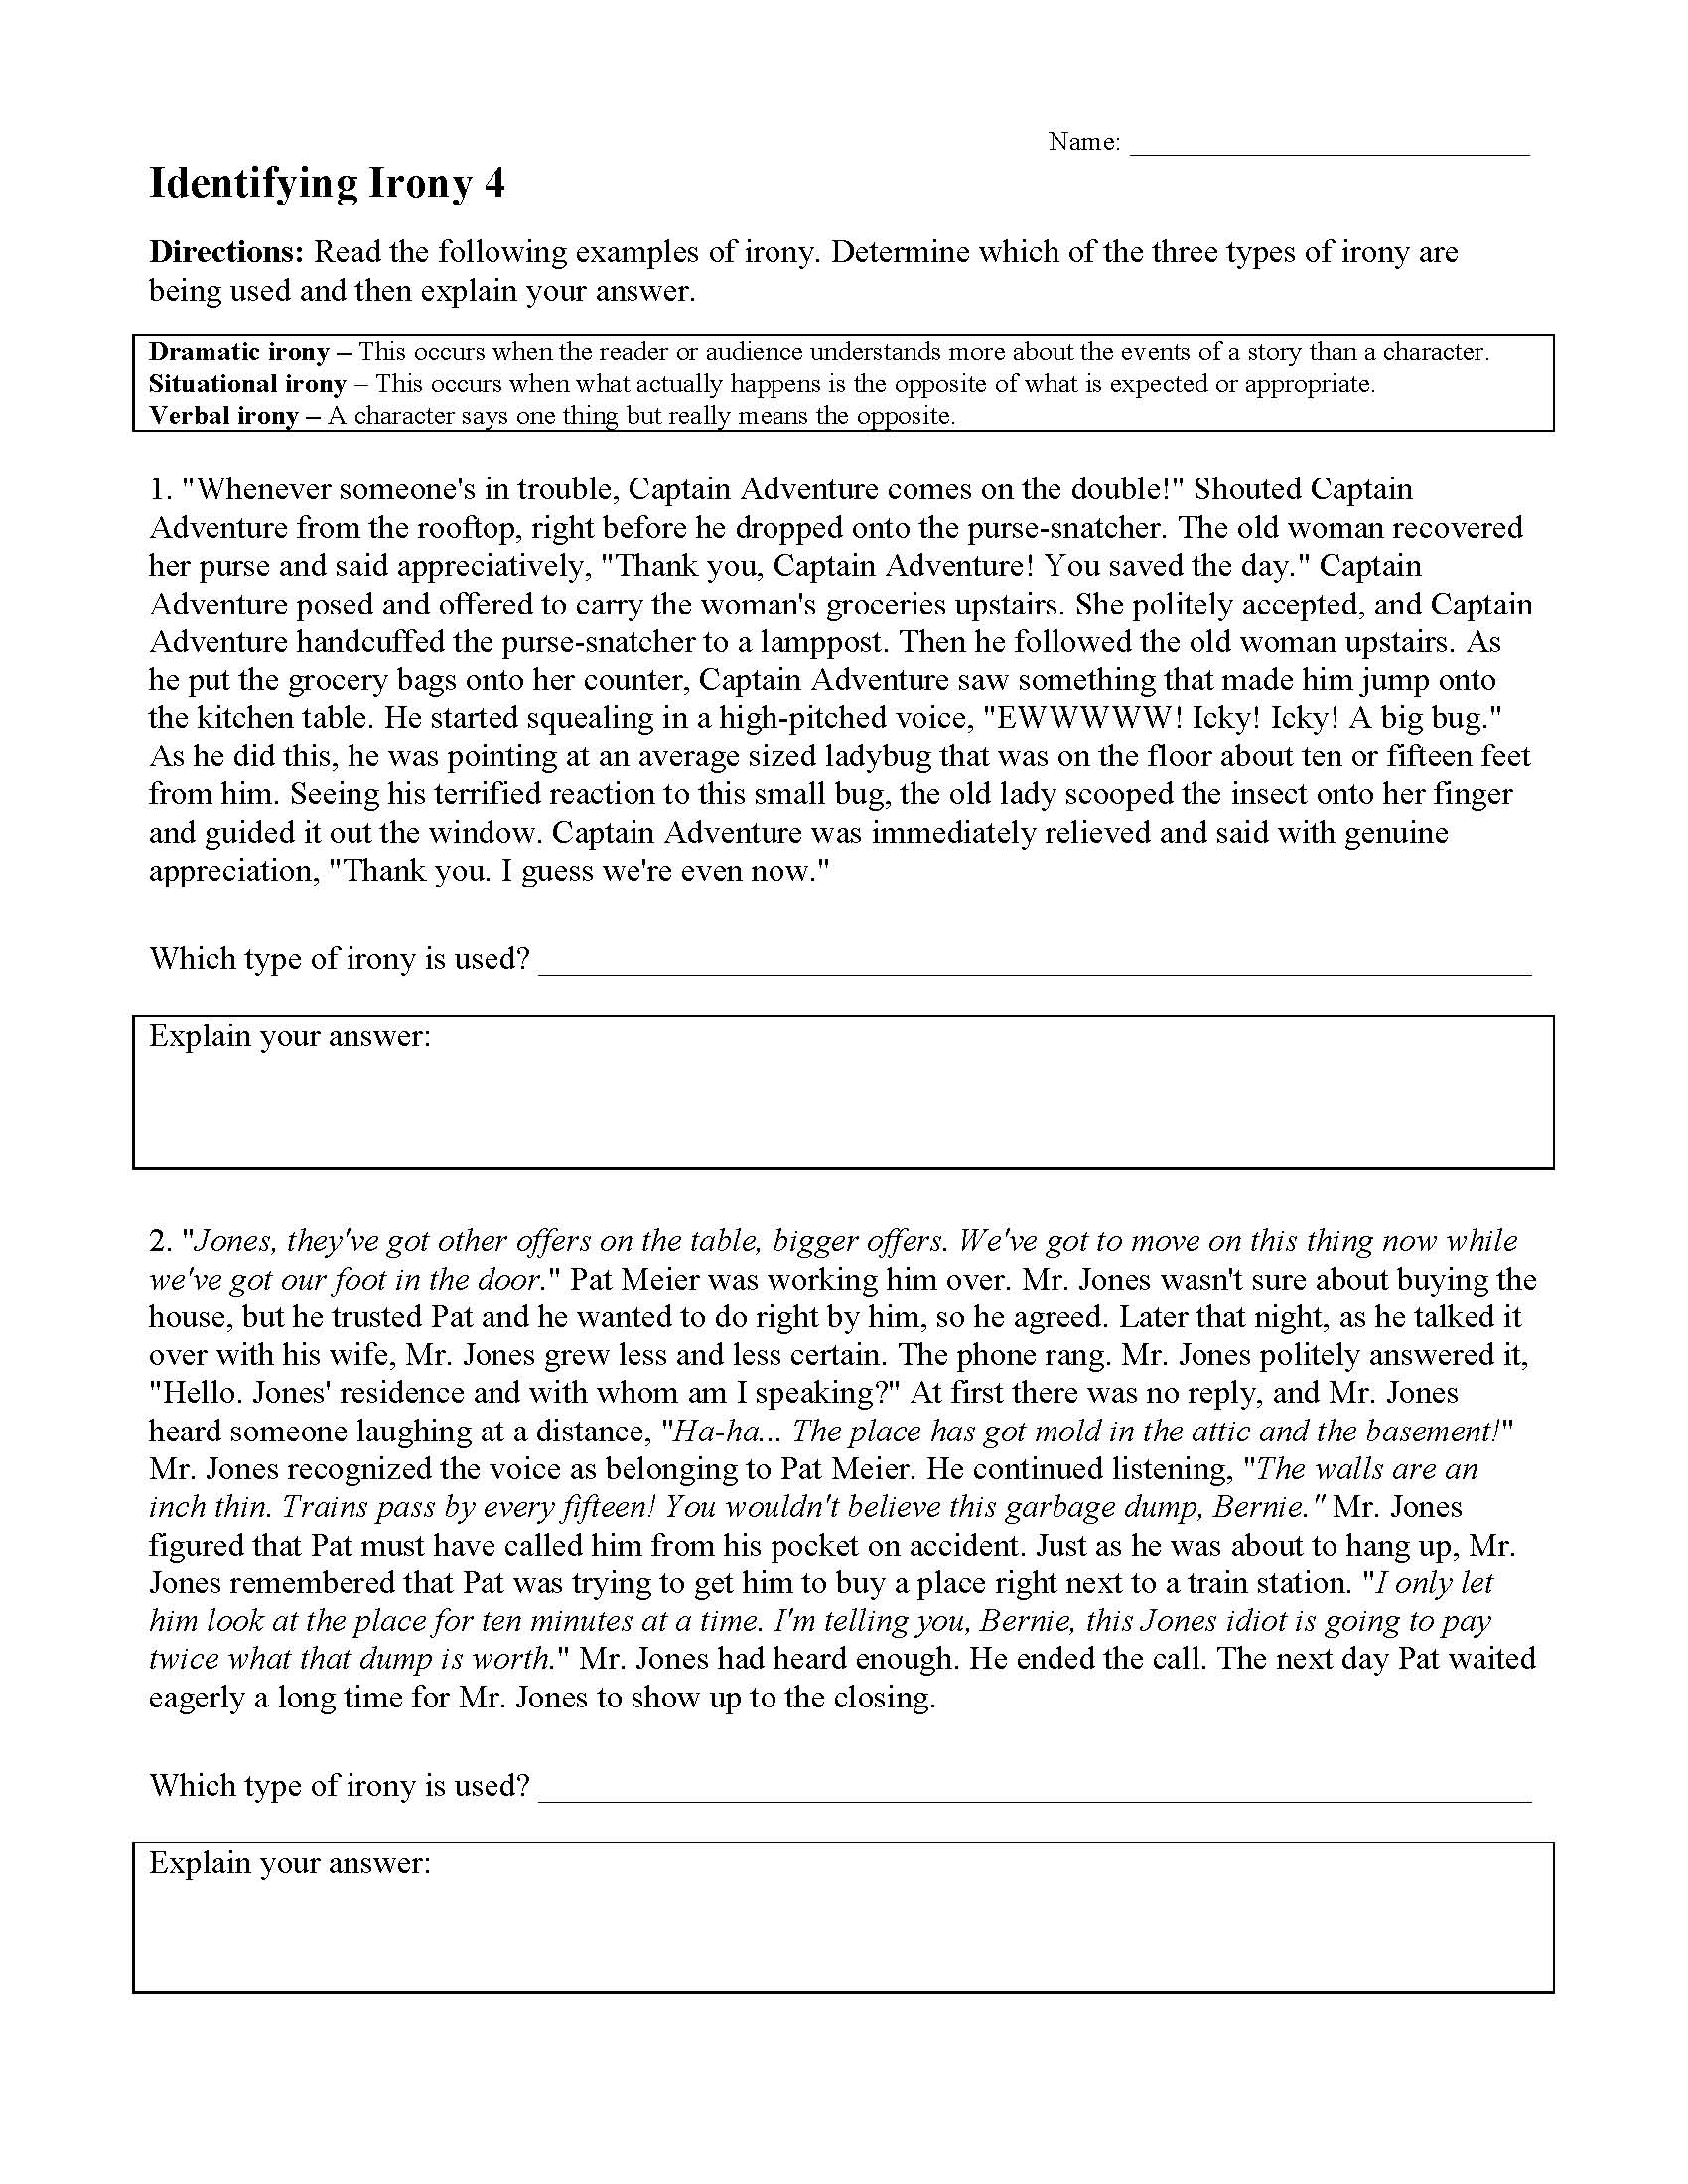 This is a preview image of Irony Worksheet 4. Click on it to enlarge it or view the source file.